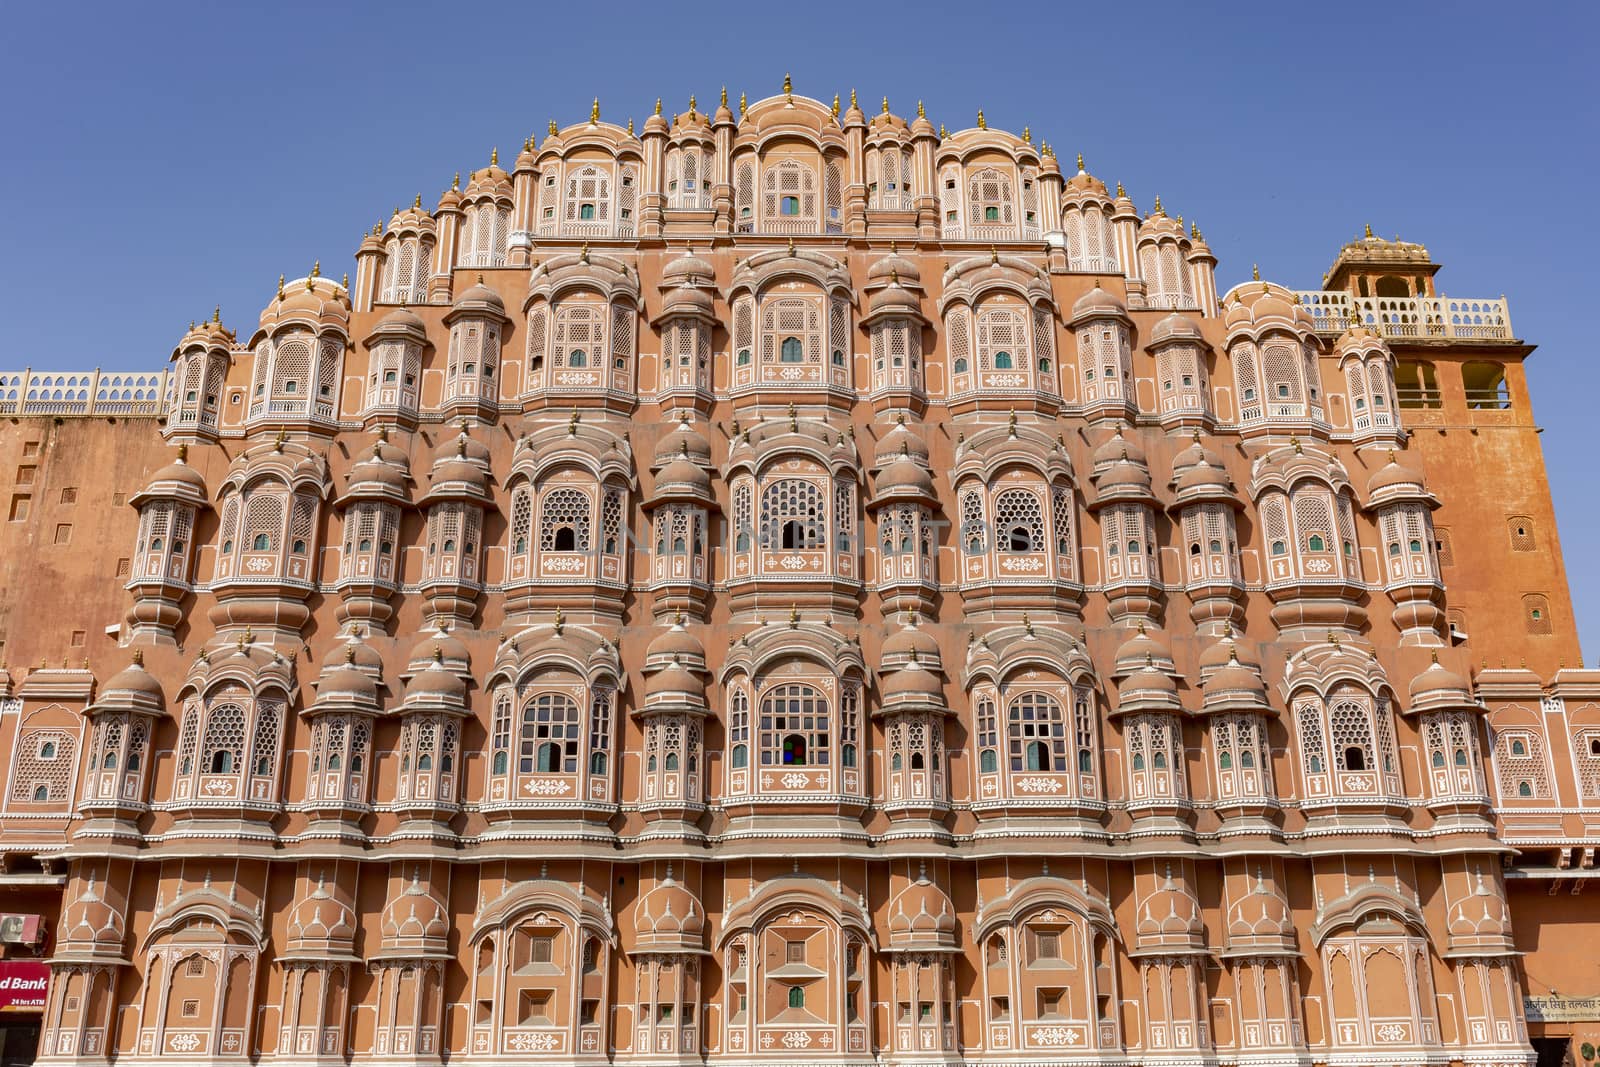 Hawa Mahal palace (Palace of the Winds) in Jaipur, Rajasthan, In by Tjeerdkruse